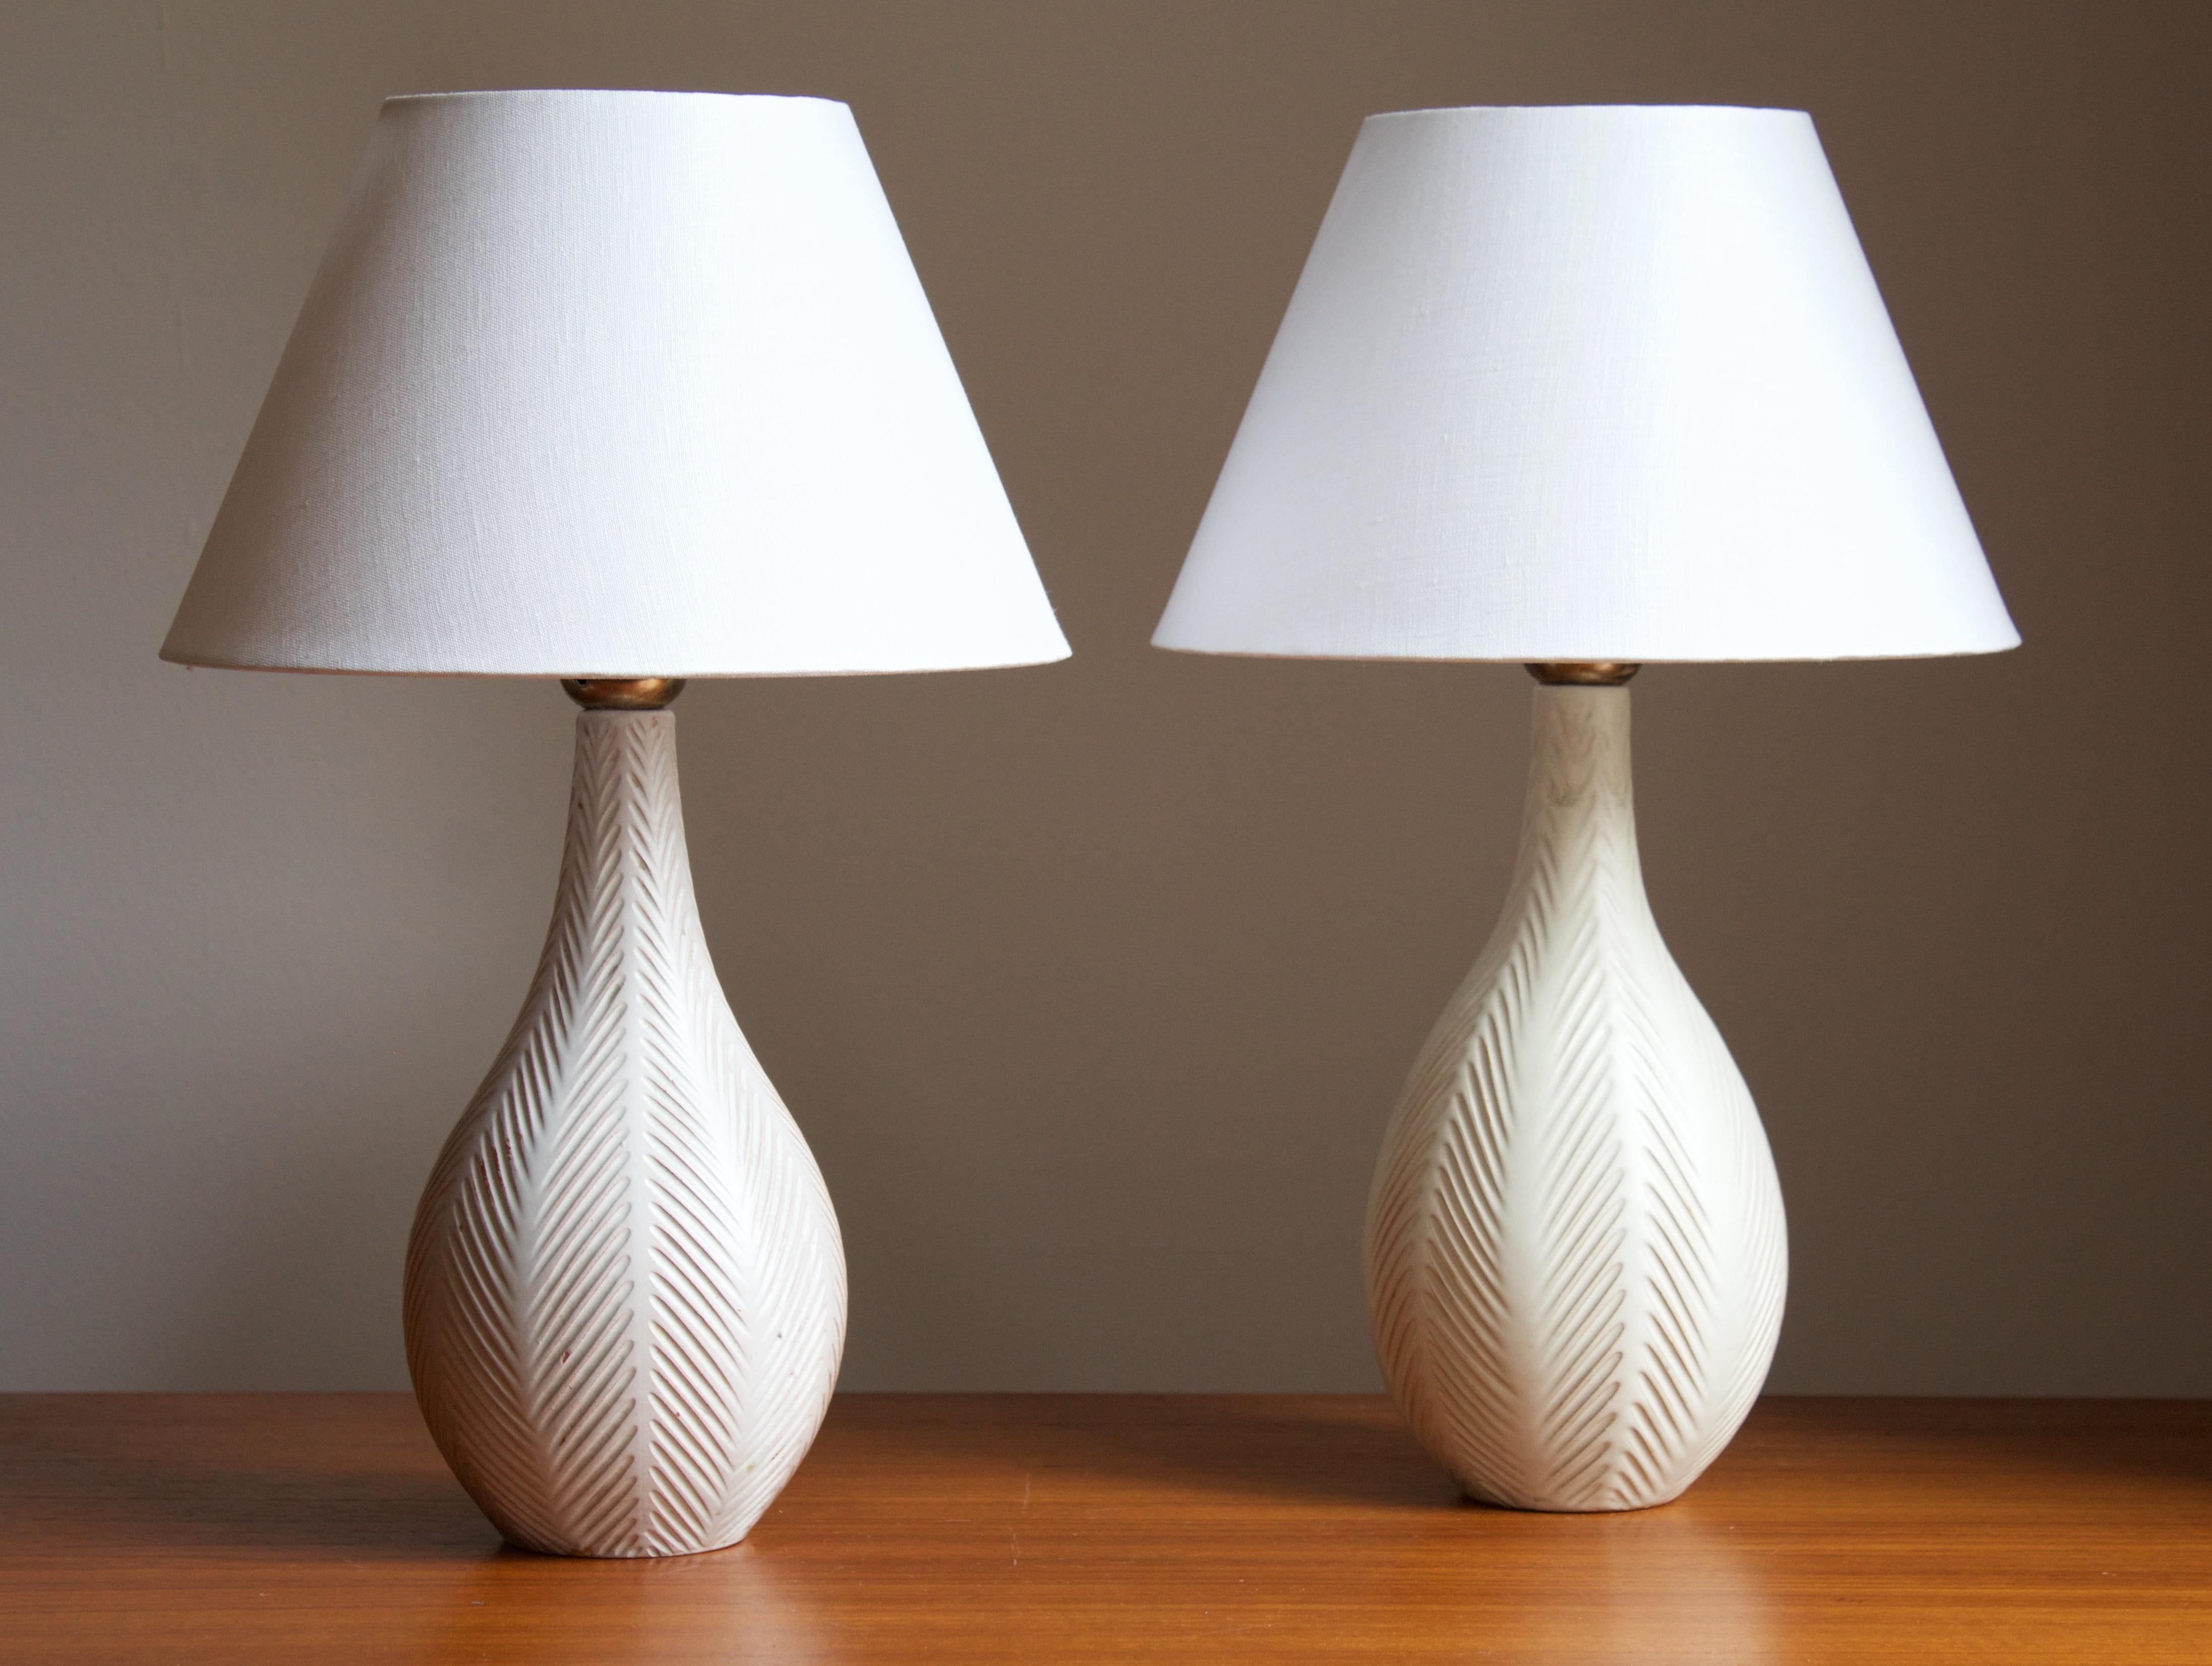 A pair of early modernist table lamps. Produced by Upsala-Ekeby, Sweden, 1930s.

Stated dimensions exclude lampshades. Height includes the socket. Sold without lampshades.

Other designers of the period include Ettore Sottsass, Carl Harry Stålhane,